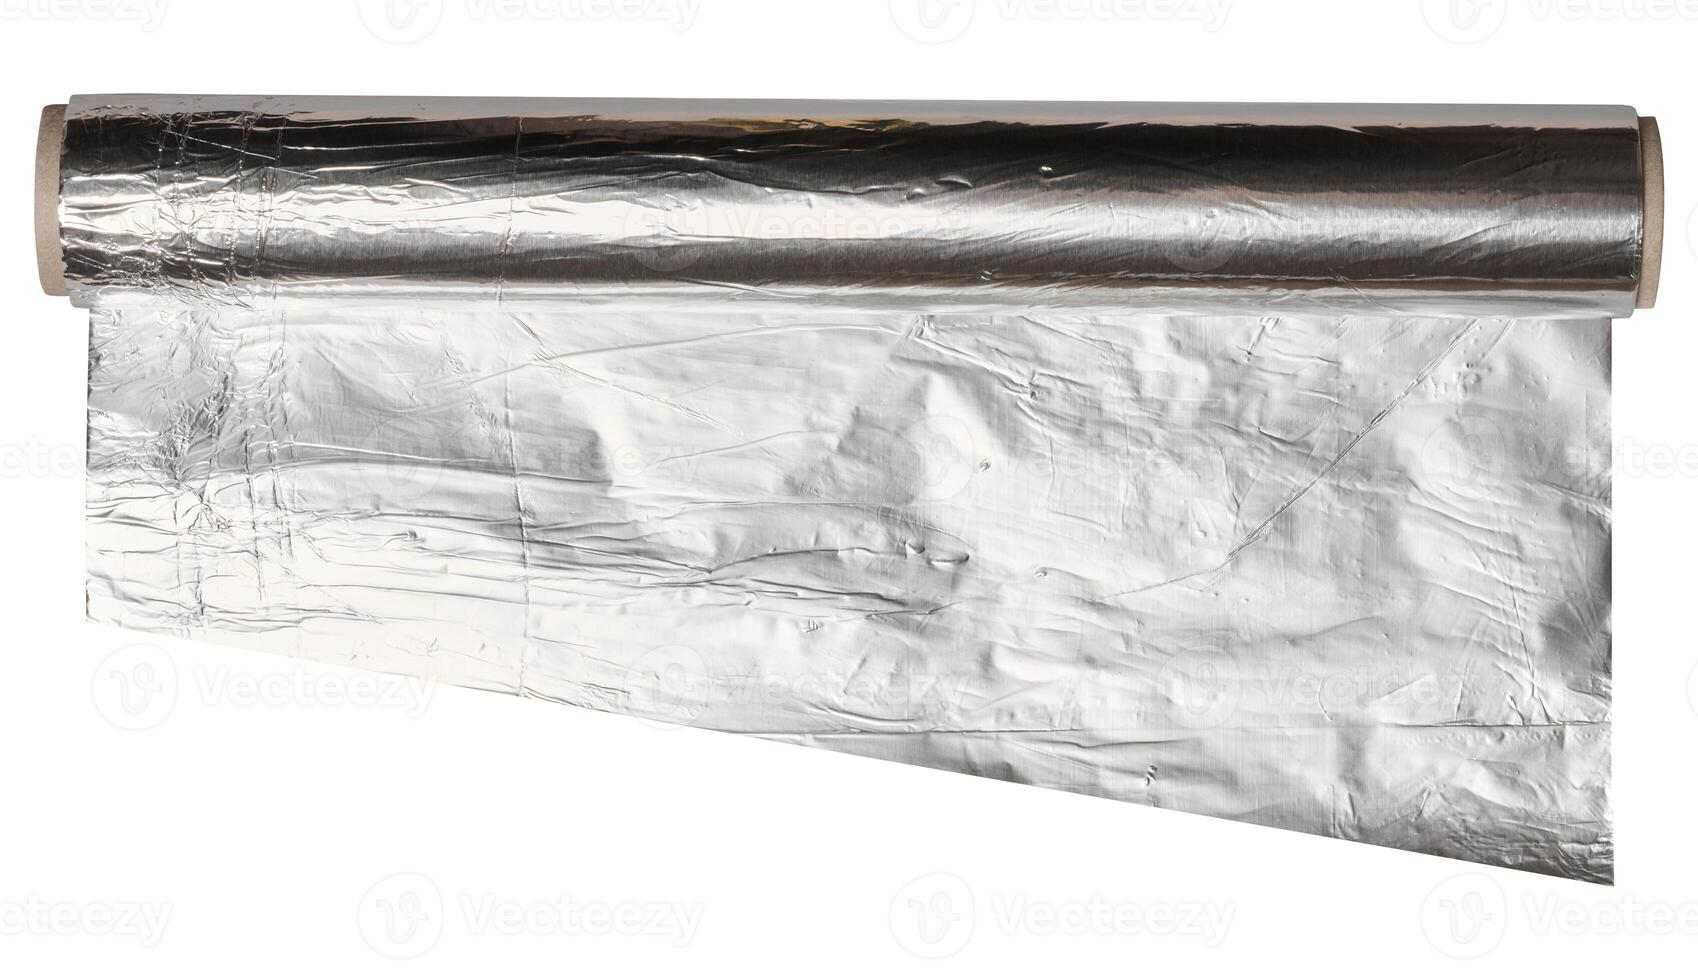 Roll of gray foil for baking and packaging food on a white background photo